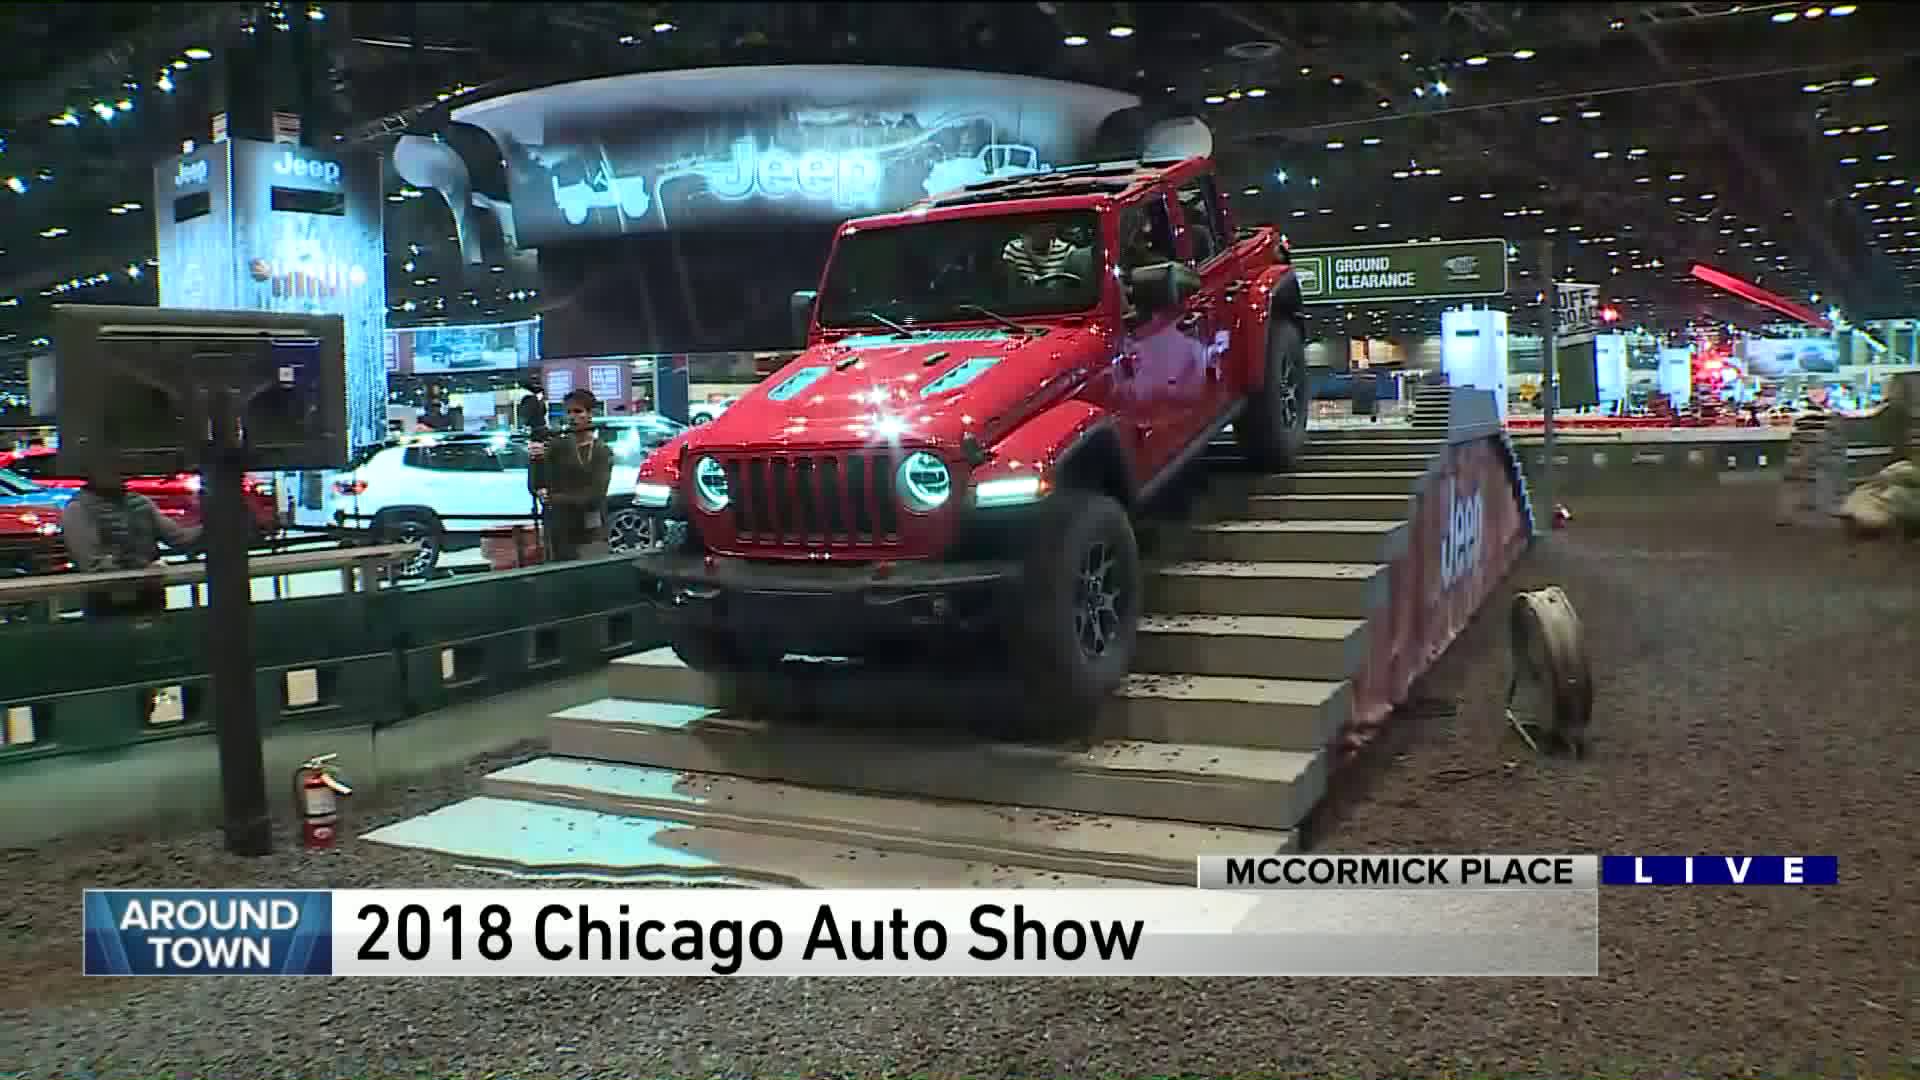 Around Town previews the Chicago Auto Show 2018